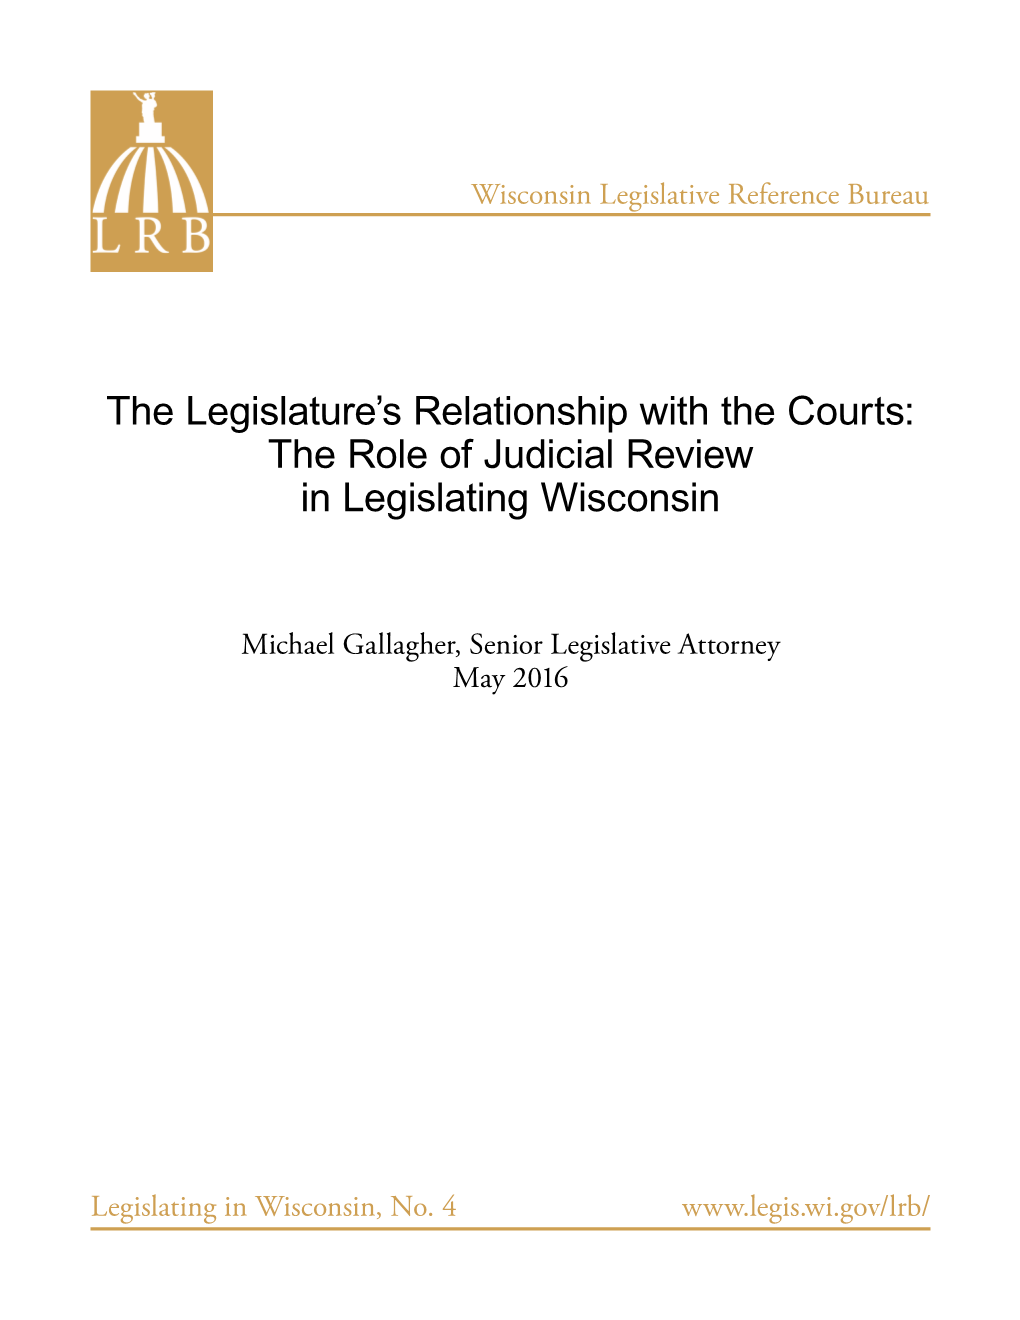 The Legislature's Relationship with the Courts: the Role of Judicial